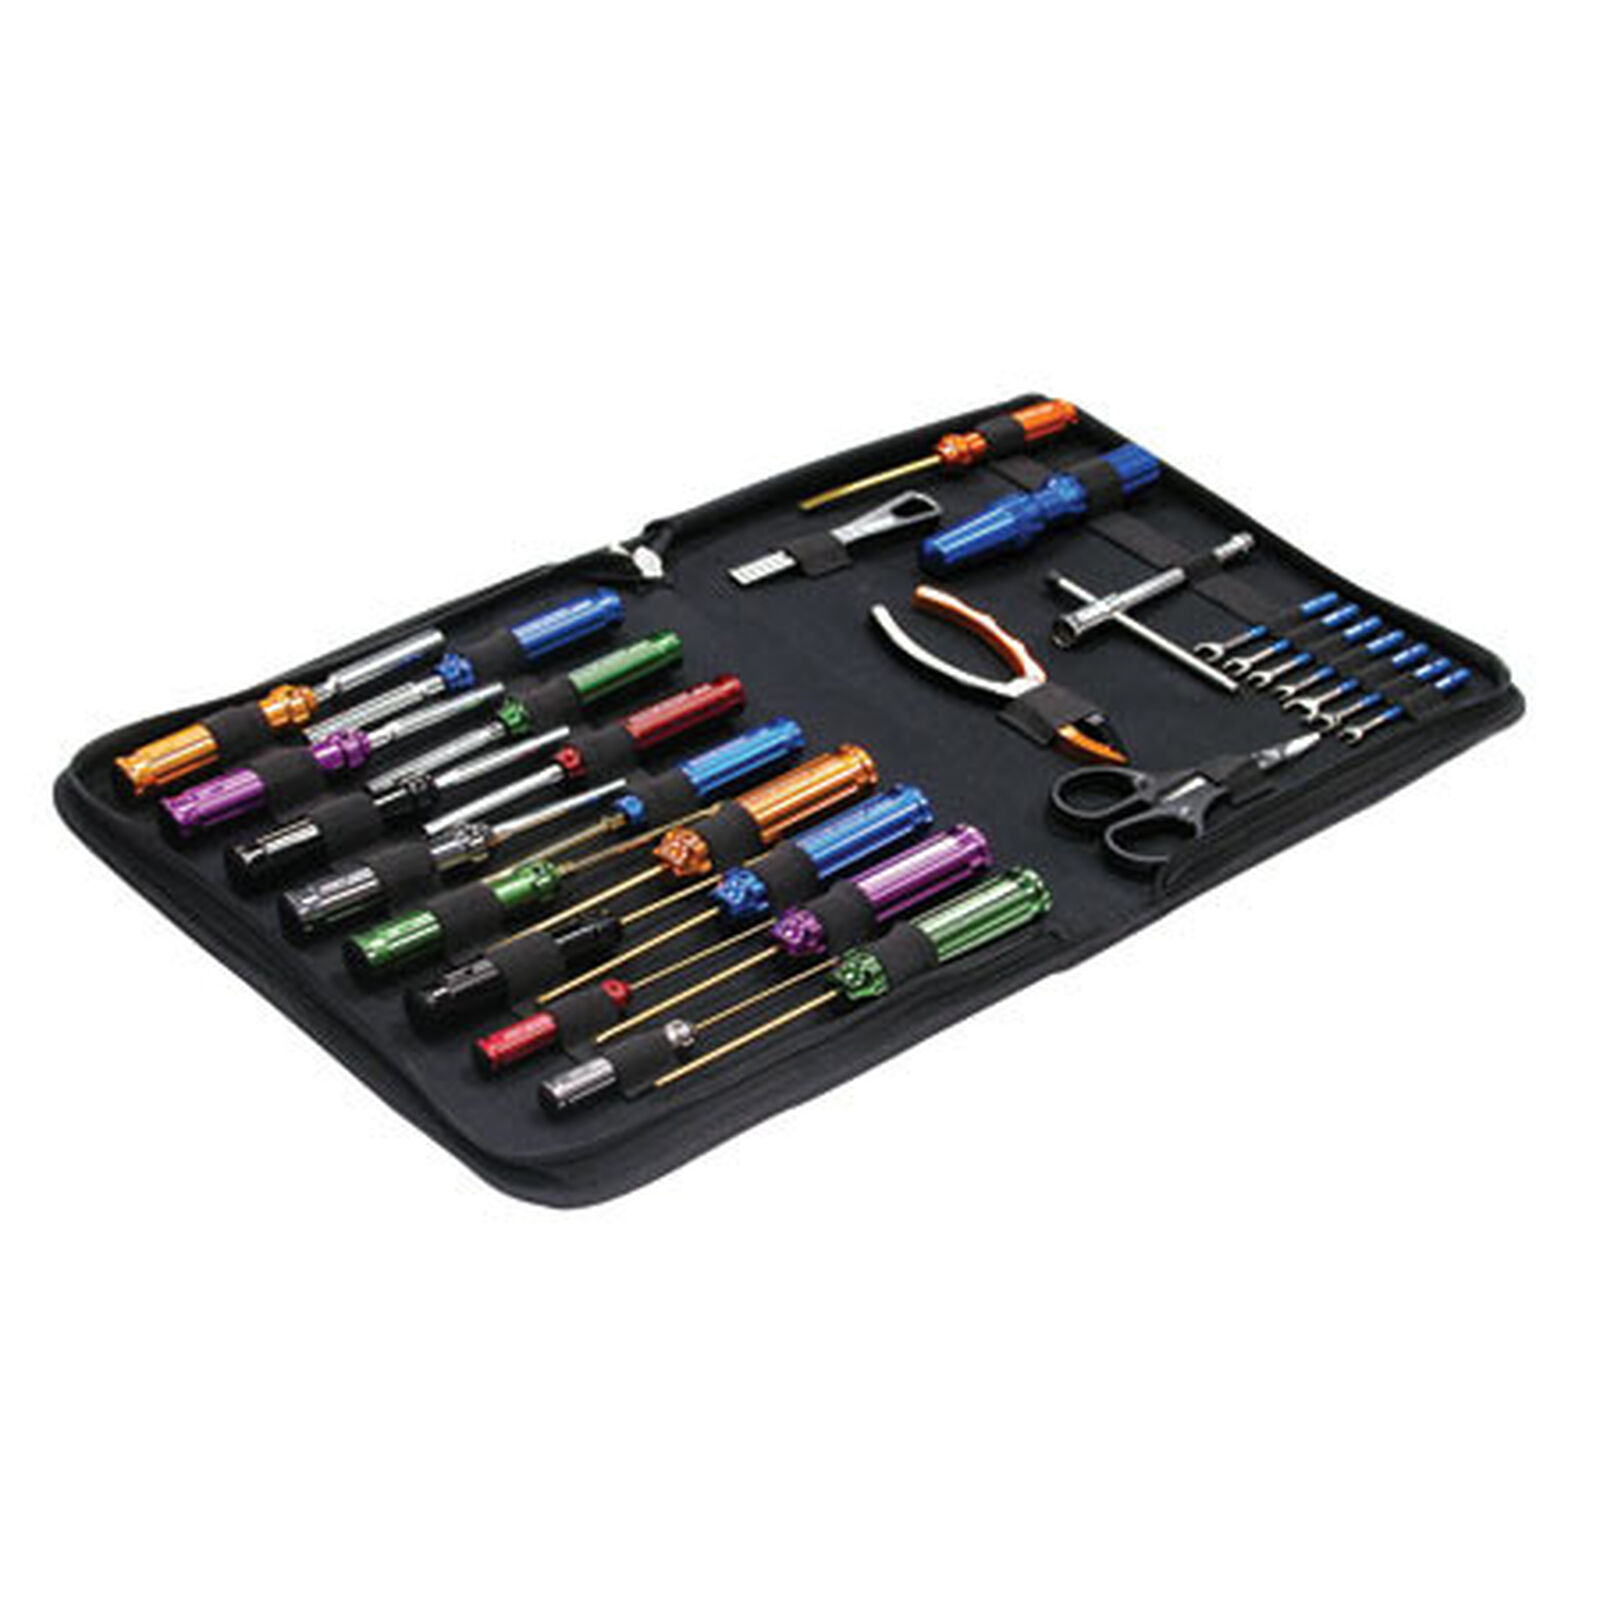 Complete 29 pc Racing Tool Set/Pro Carrying Bag